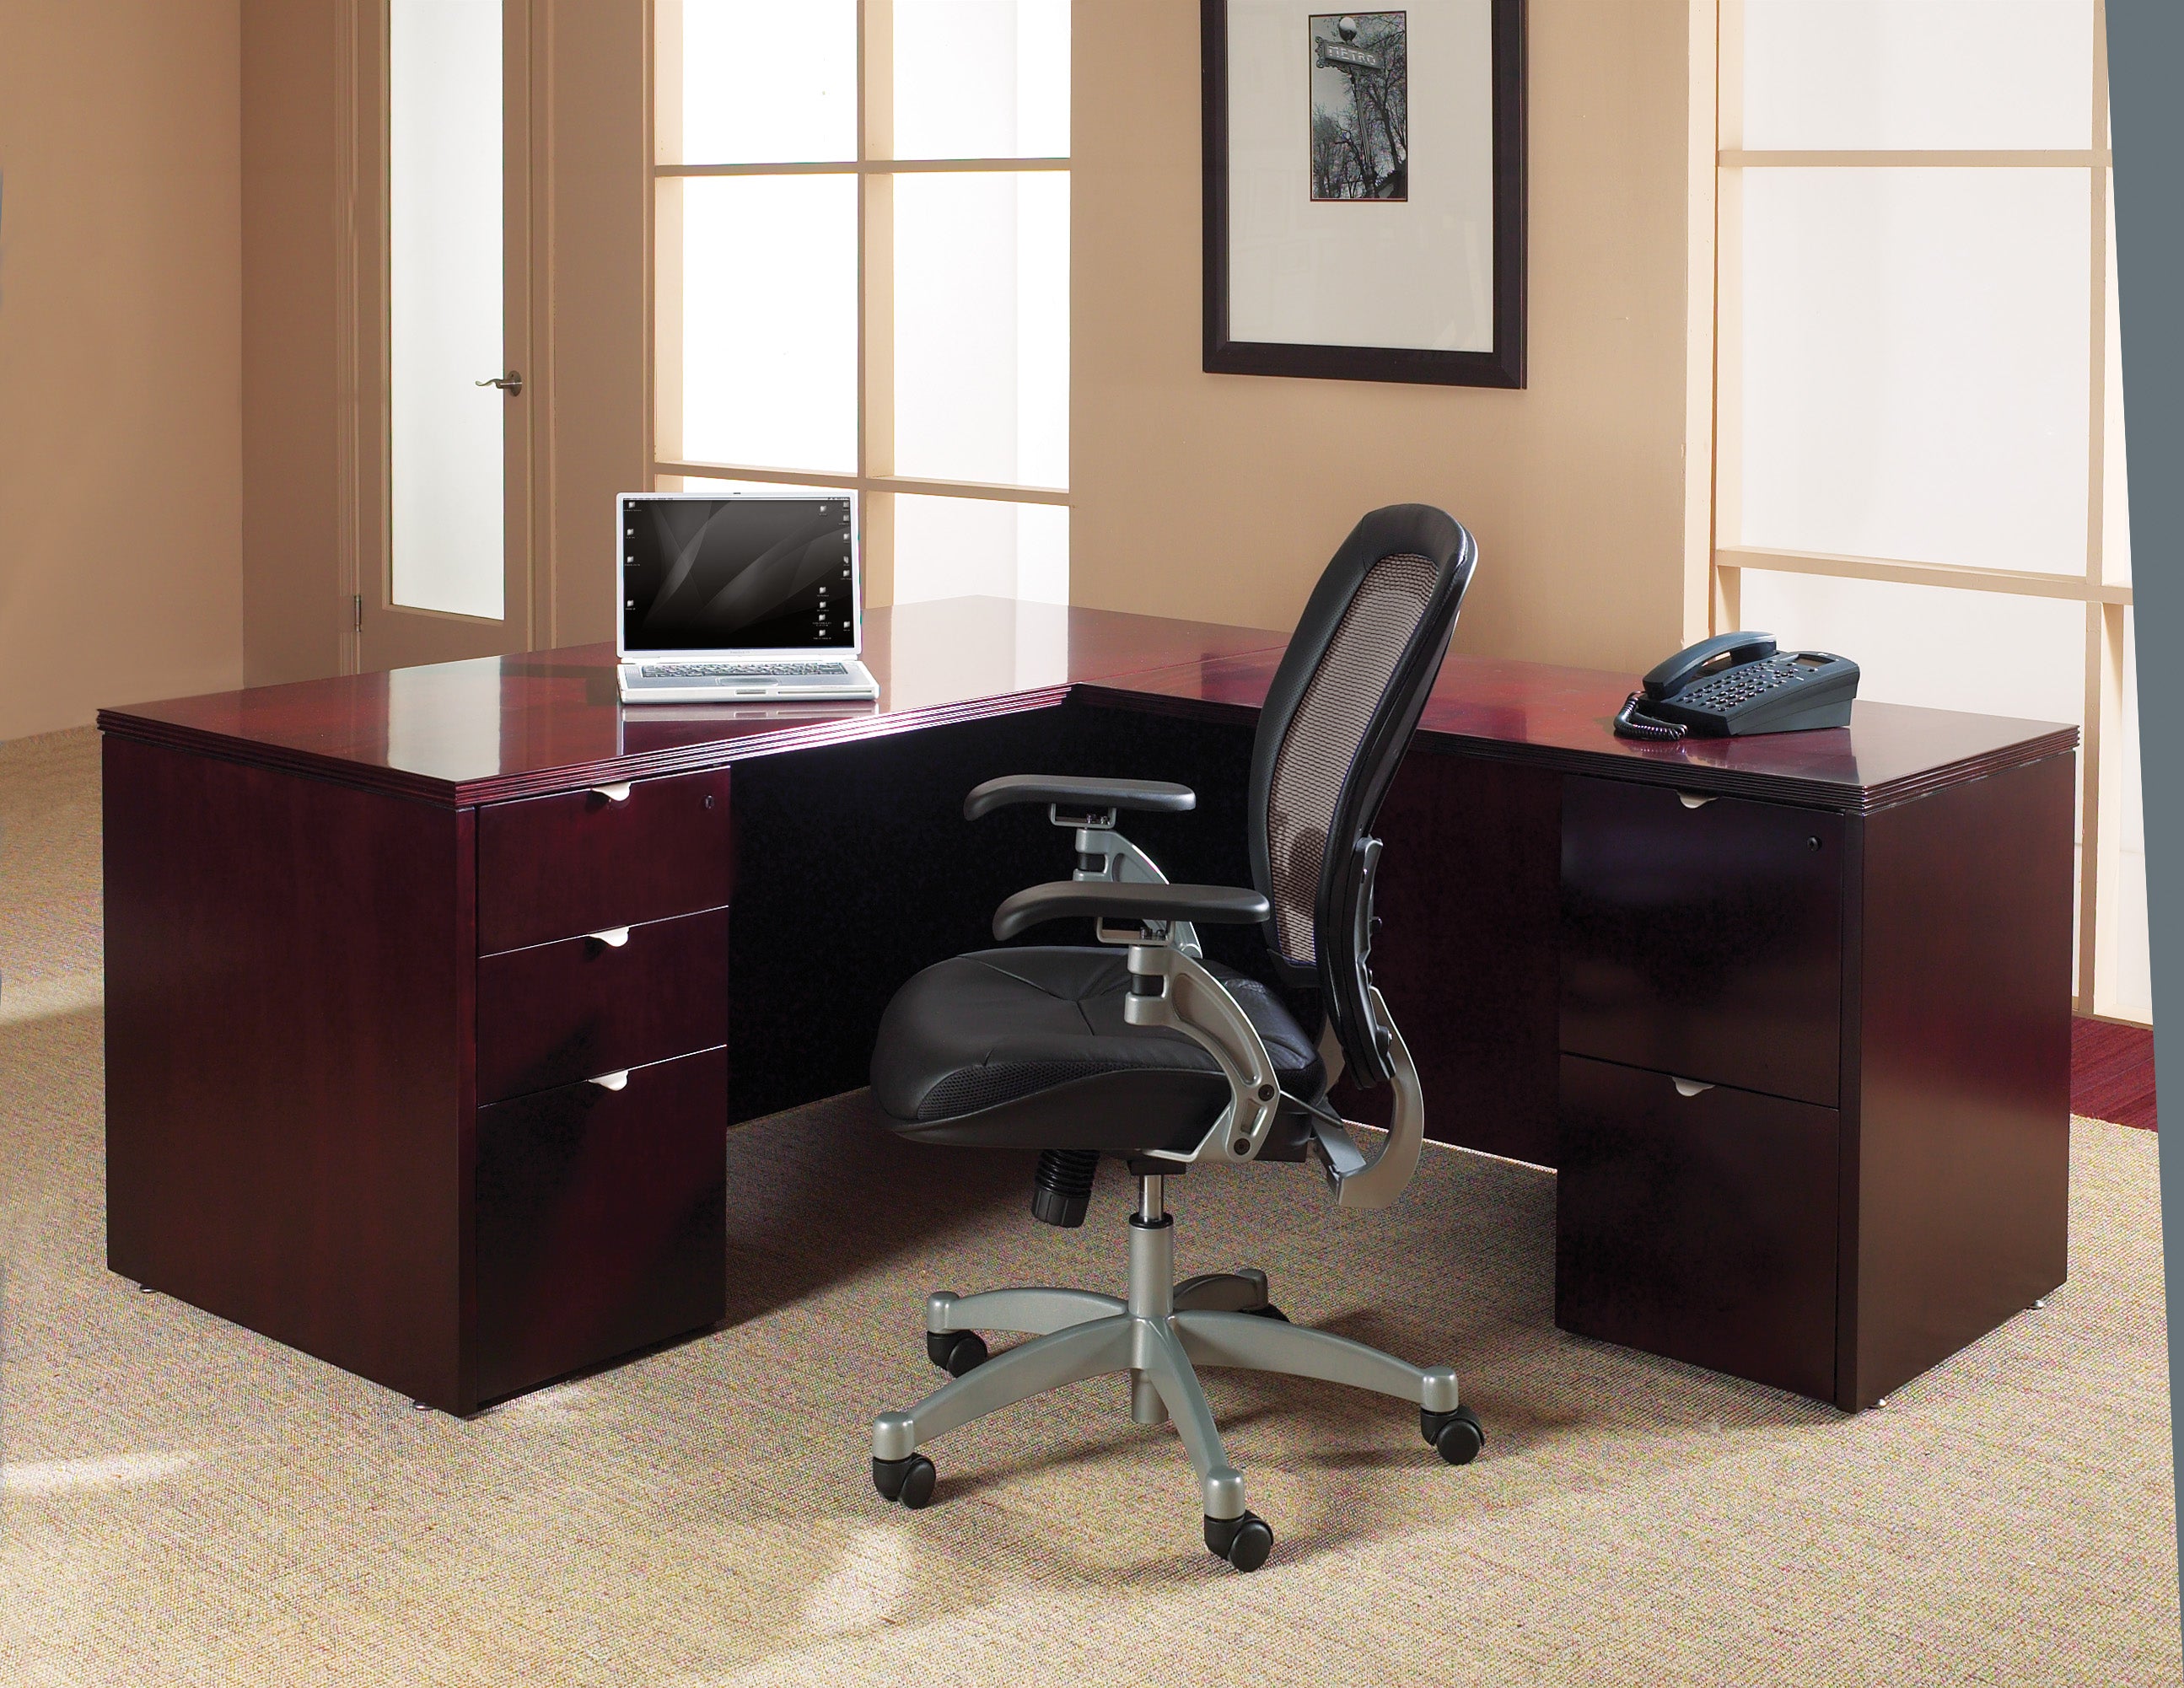 KEN-TYP9 - Kenwood Executive L Shaped Office Desk by Office Star